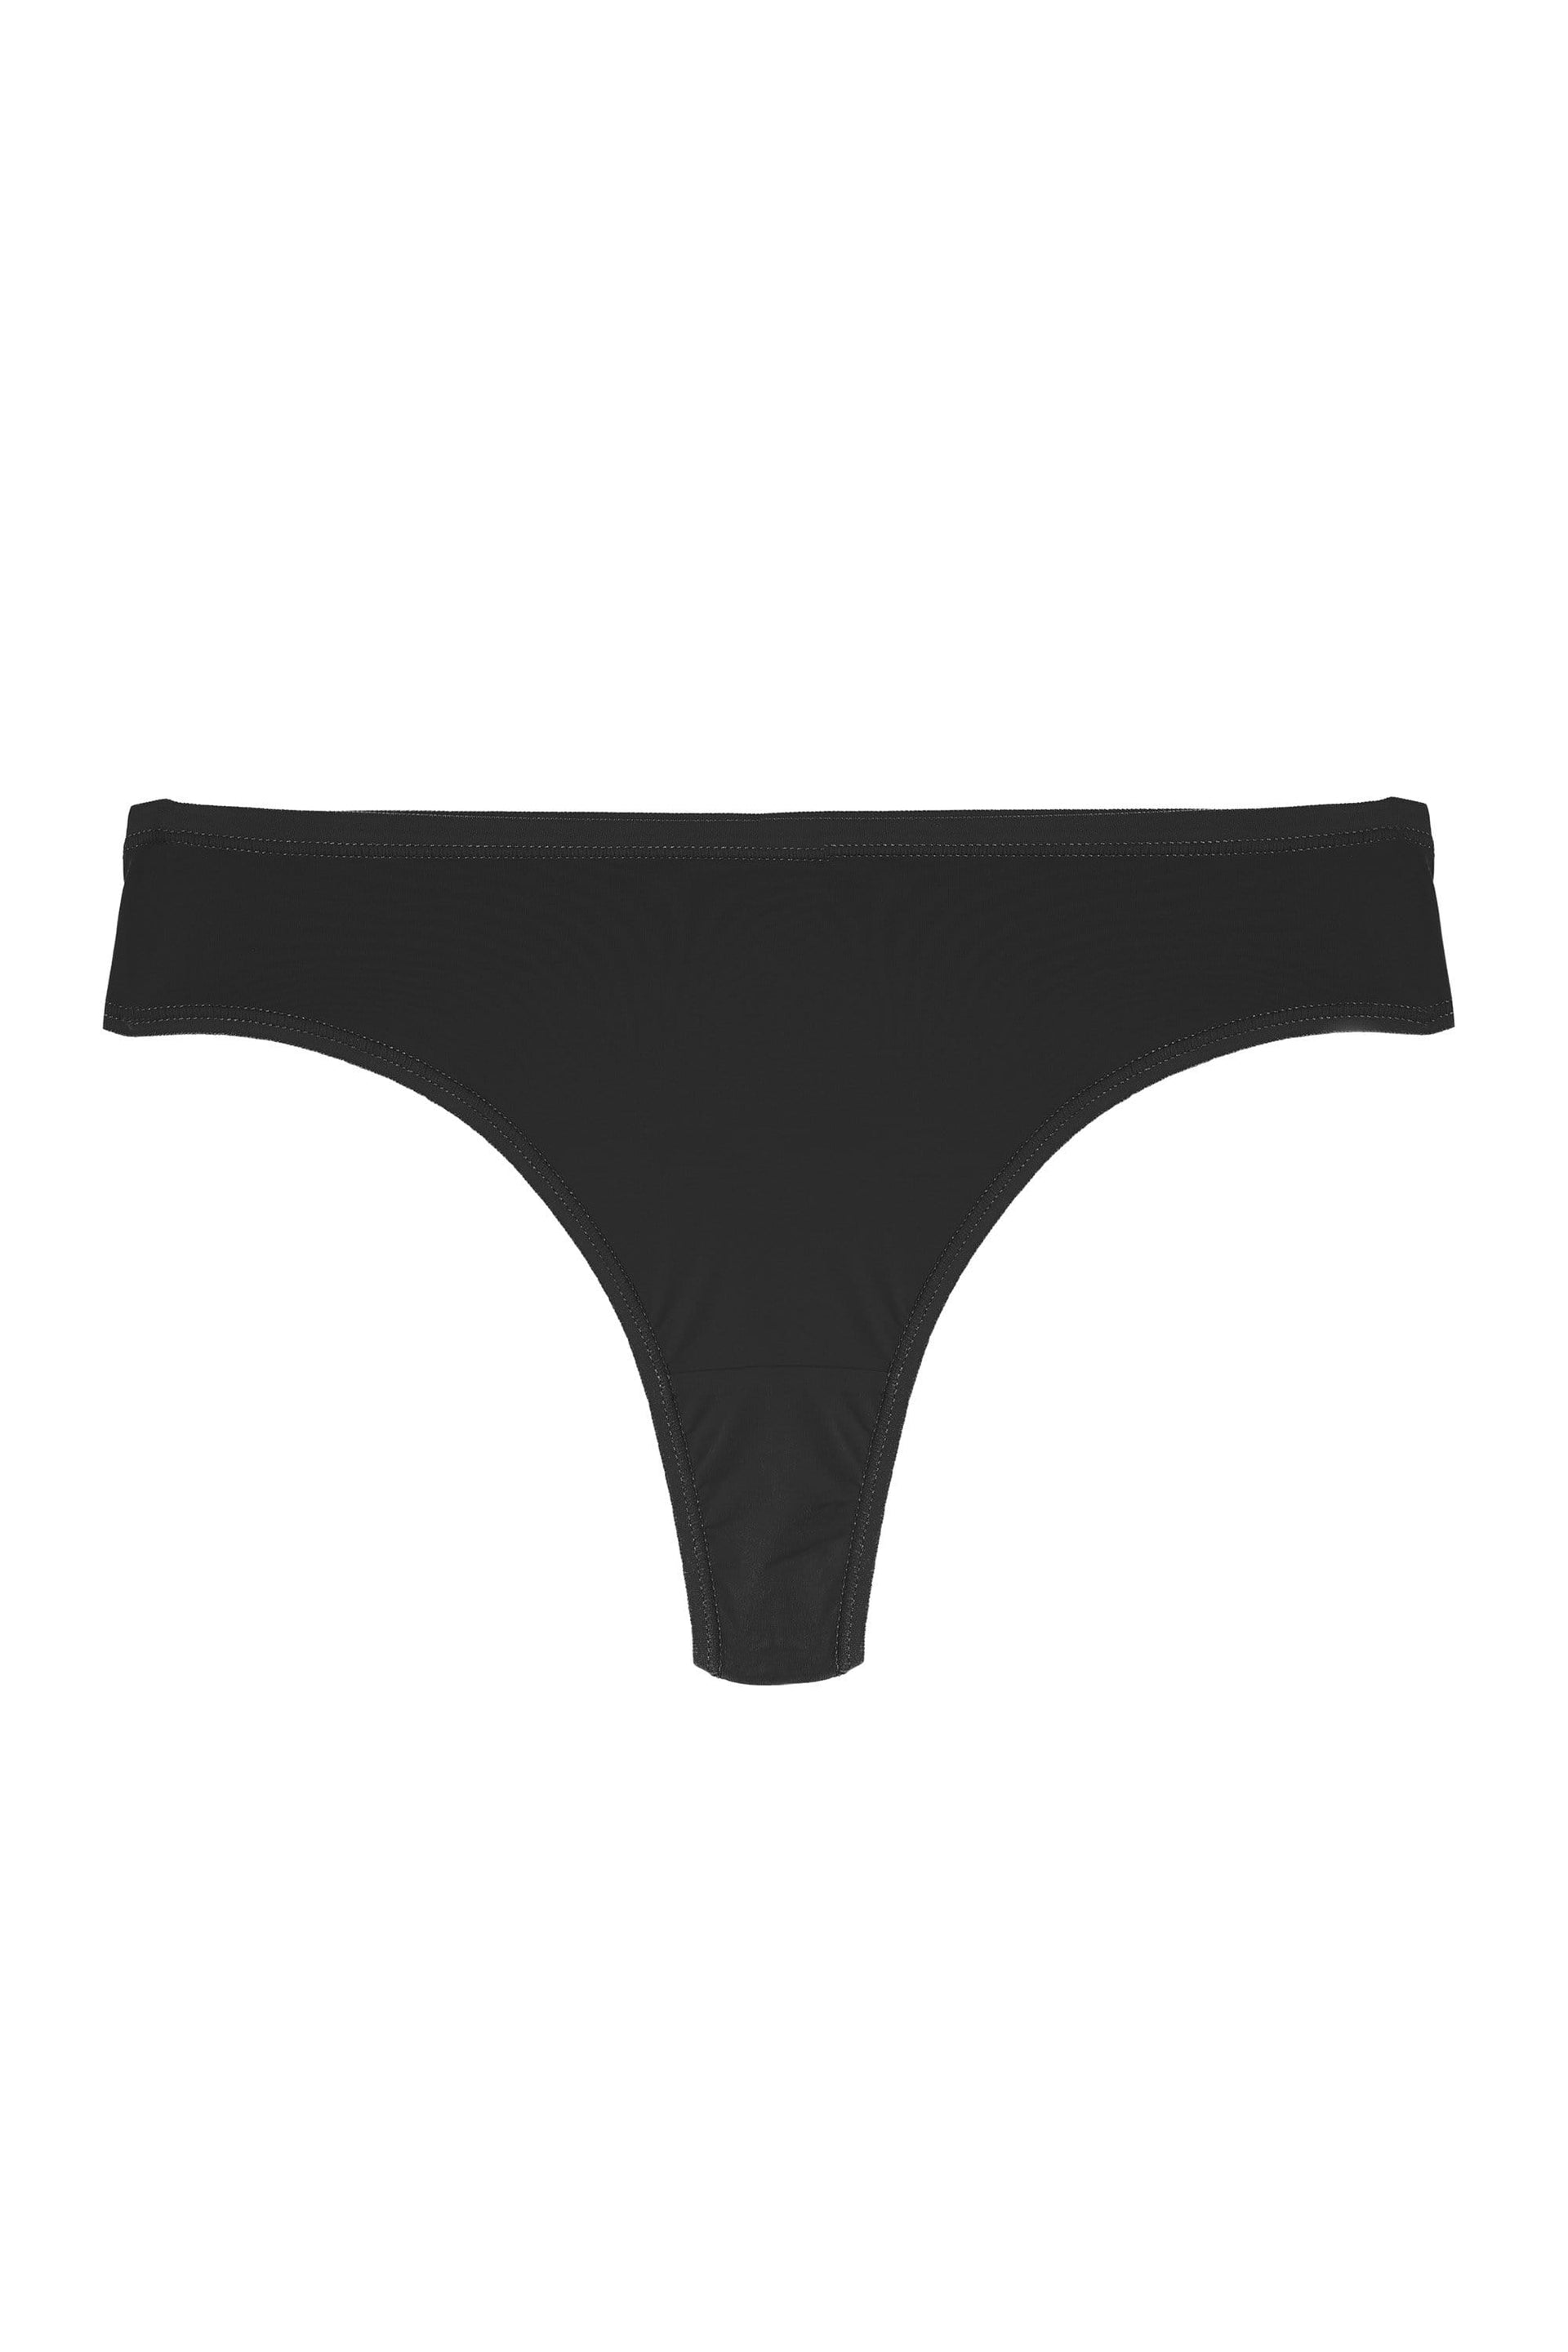 Deja Day Second Skin Black Recycled Thong